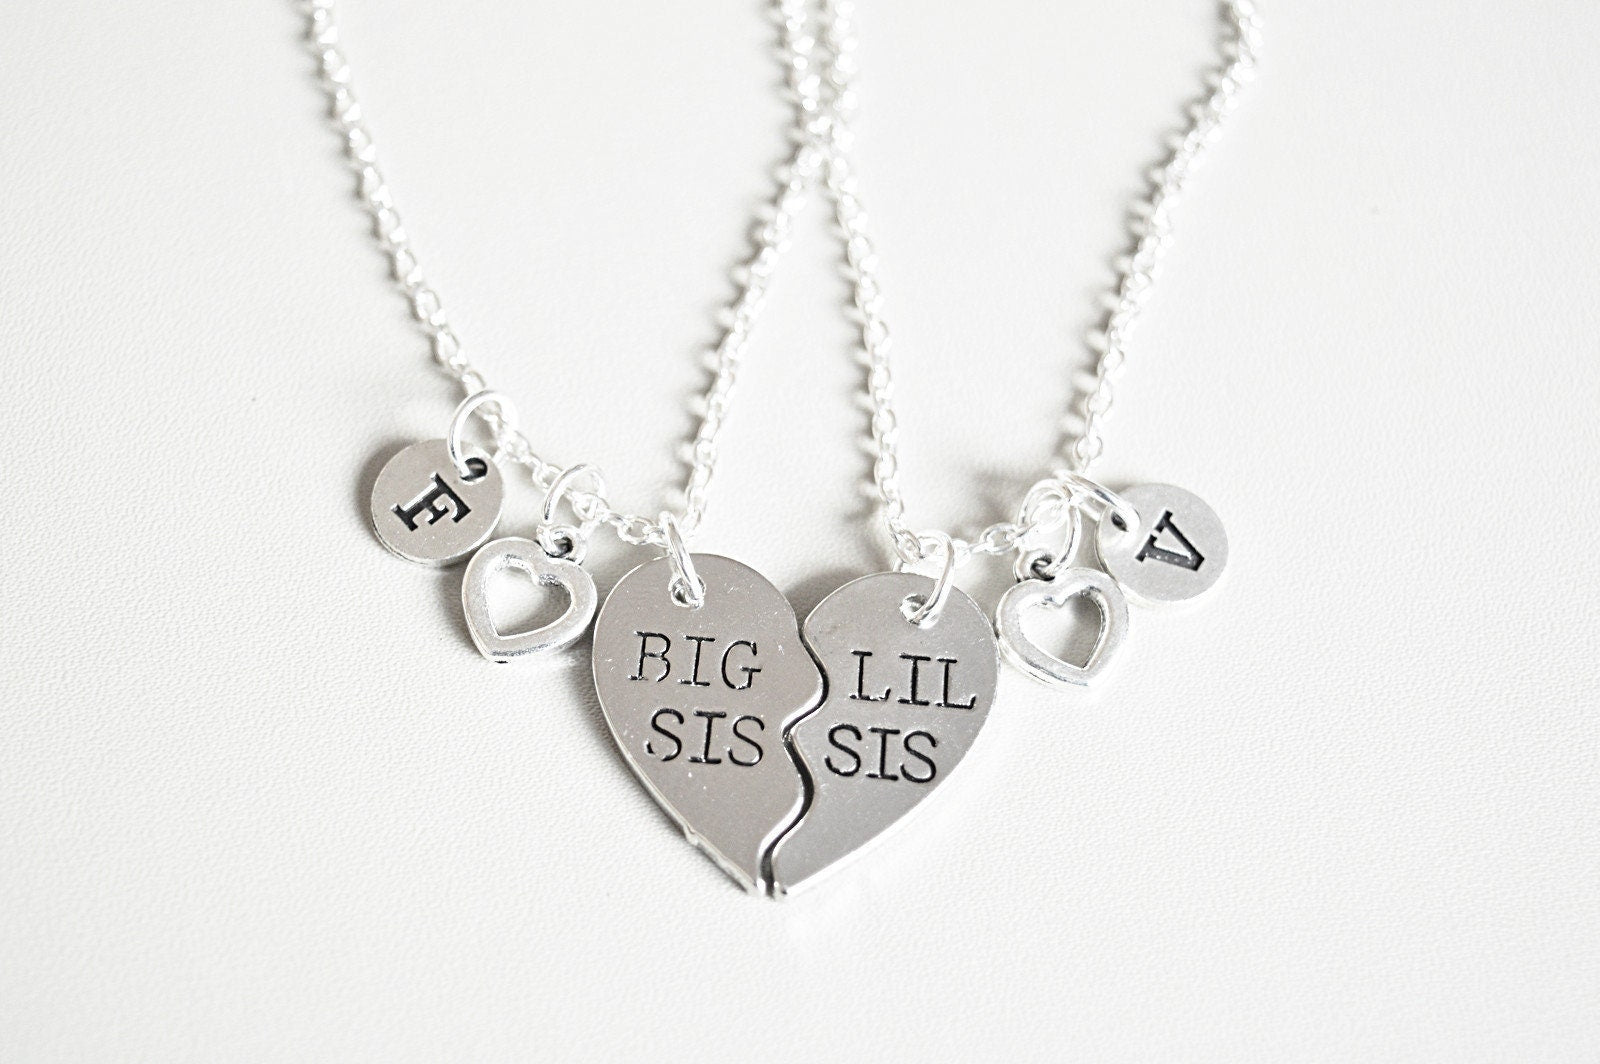 Sister necklaces, Big Little Sister necklace for 2, Big sister little sister, Sister, Sisters, Big sister little sister, Big Sis Lil Sis